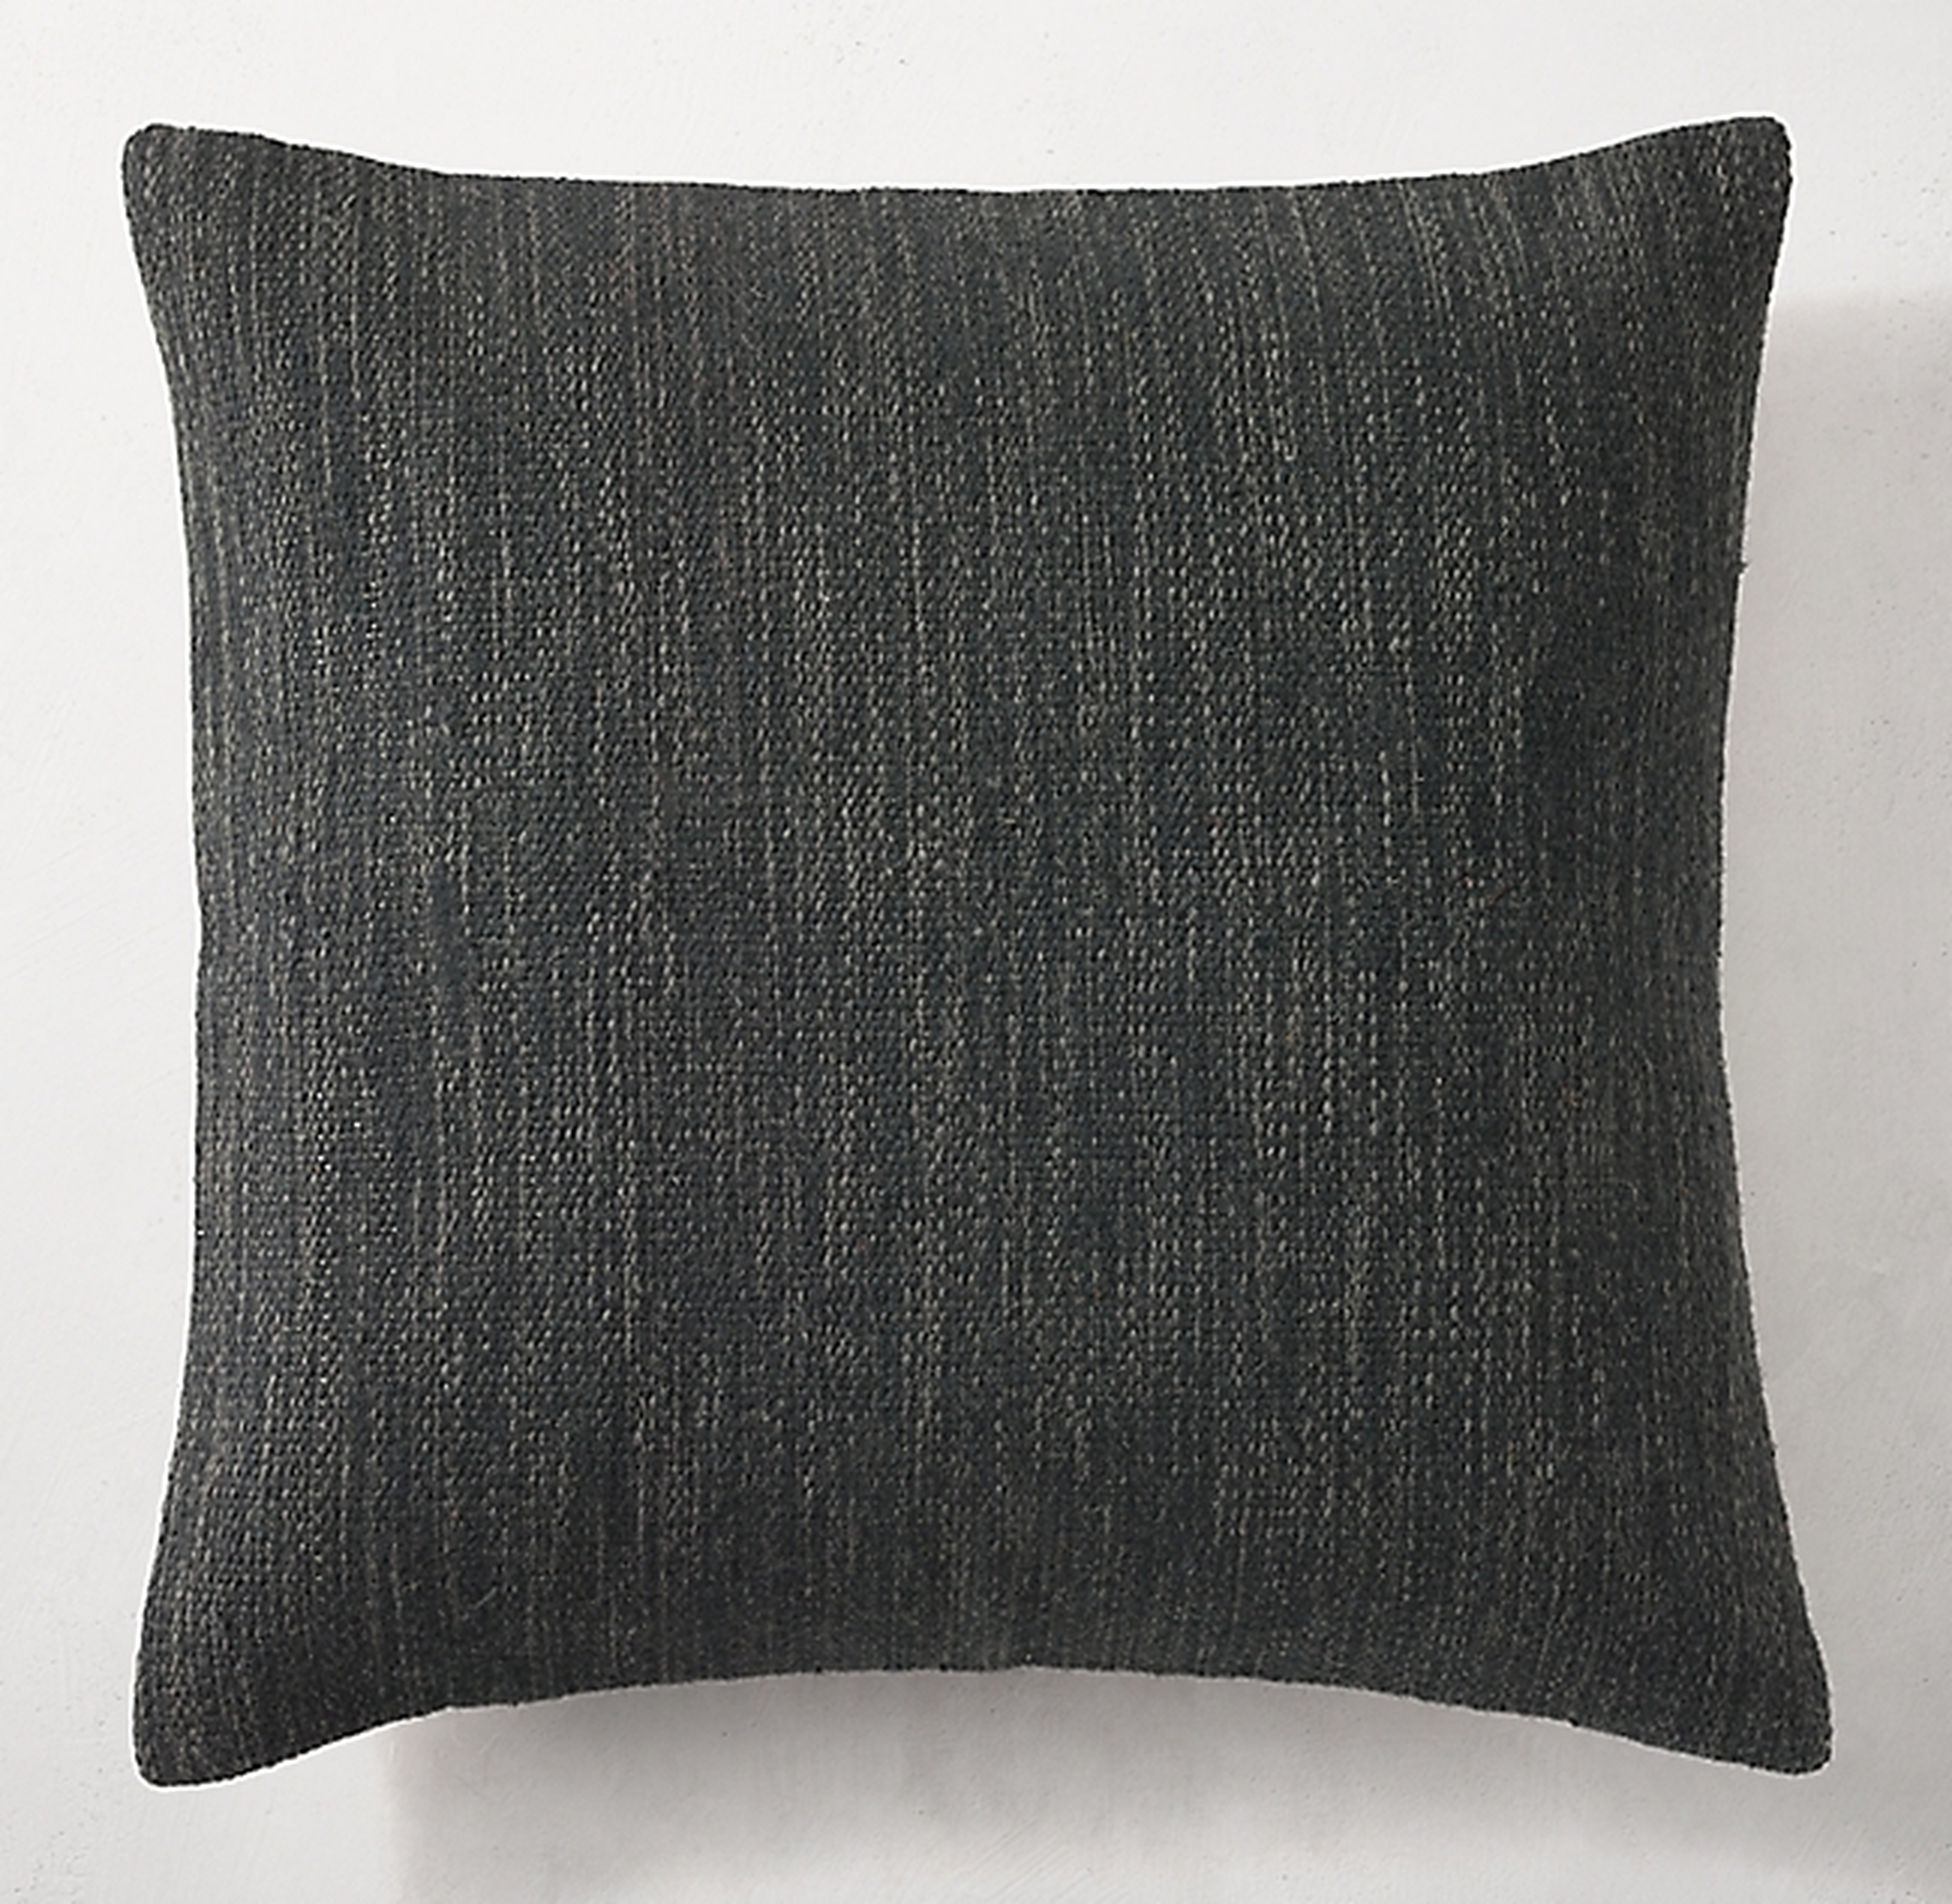 HANDWOVEN MÉLANGE FLATWEAVE SOLID PILLOW COVER - SQUARE - RH